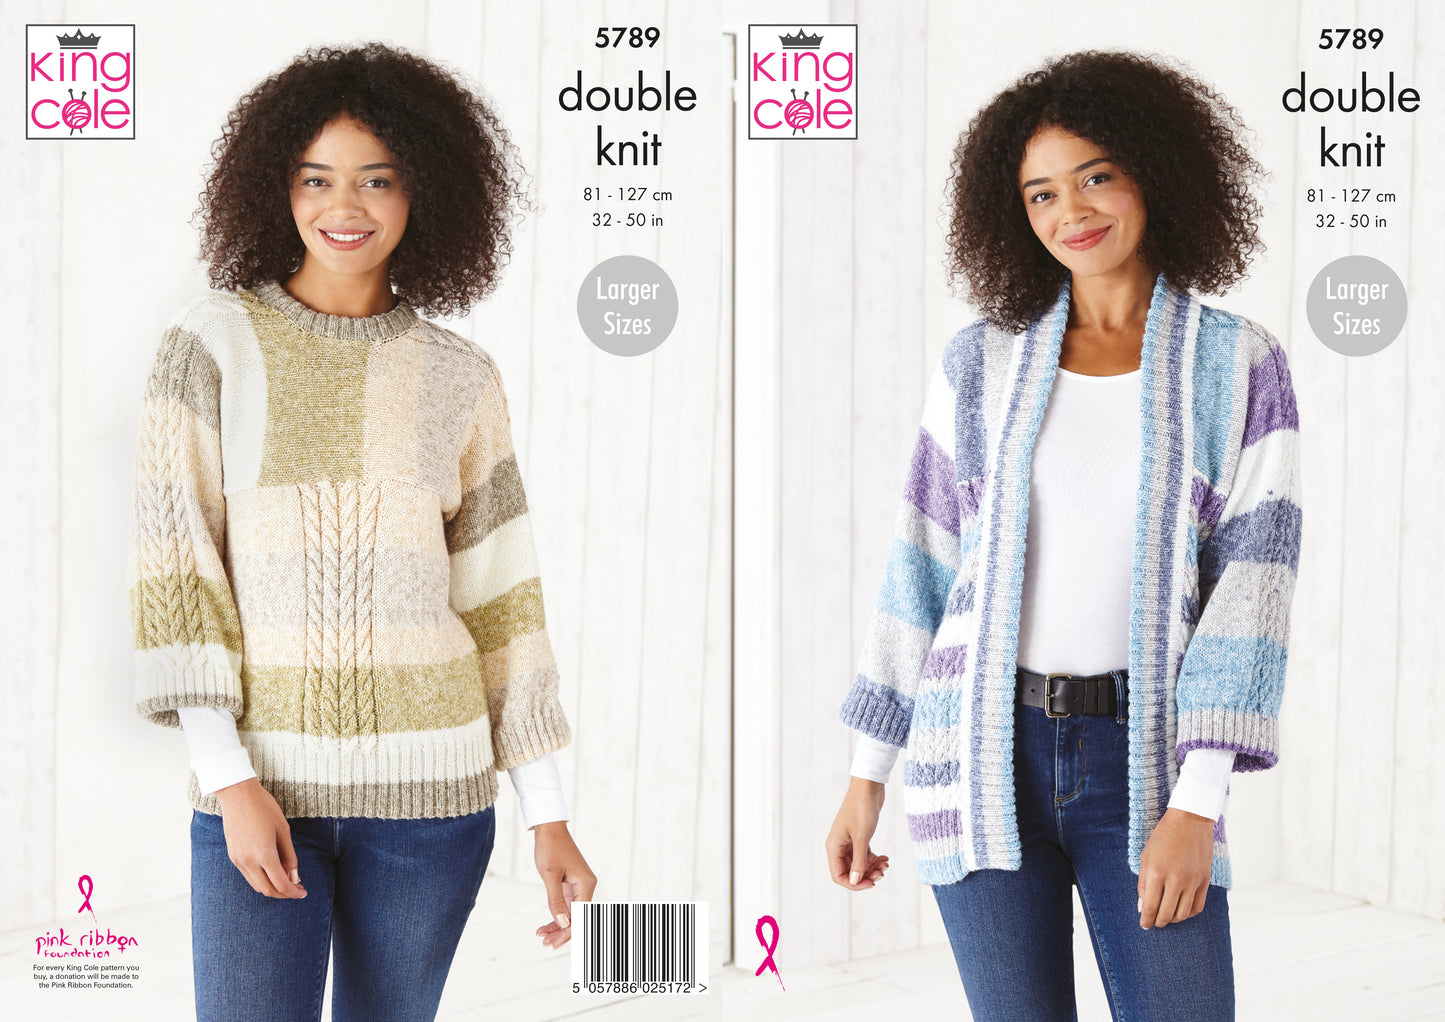 Sweater & Jacket Knitted in Harvest DK 5789